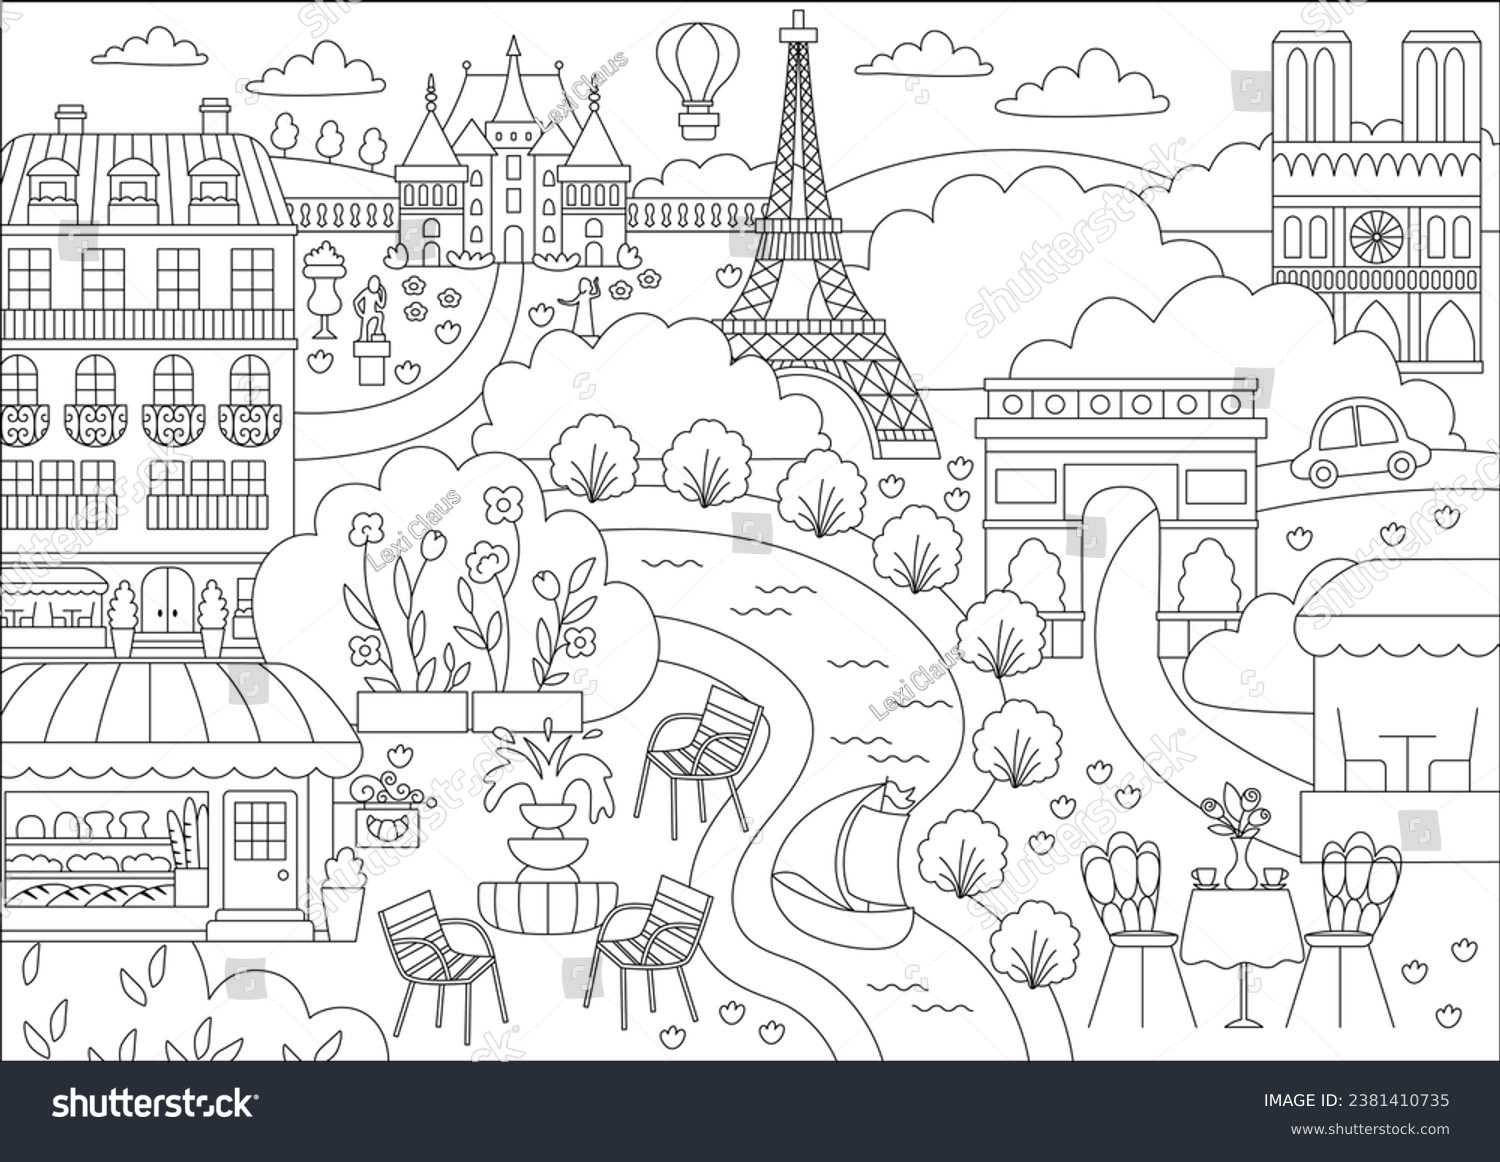 SVG of Vector Paris black and white landscape illustration. French capital city scene with sights, buildings, Eiffel tower, bakery. Cute France line background with river, field, park, castle, palace svg